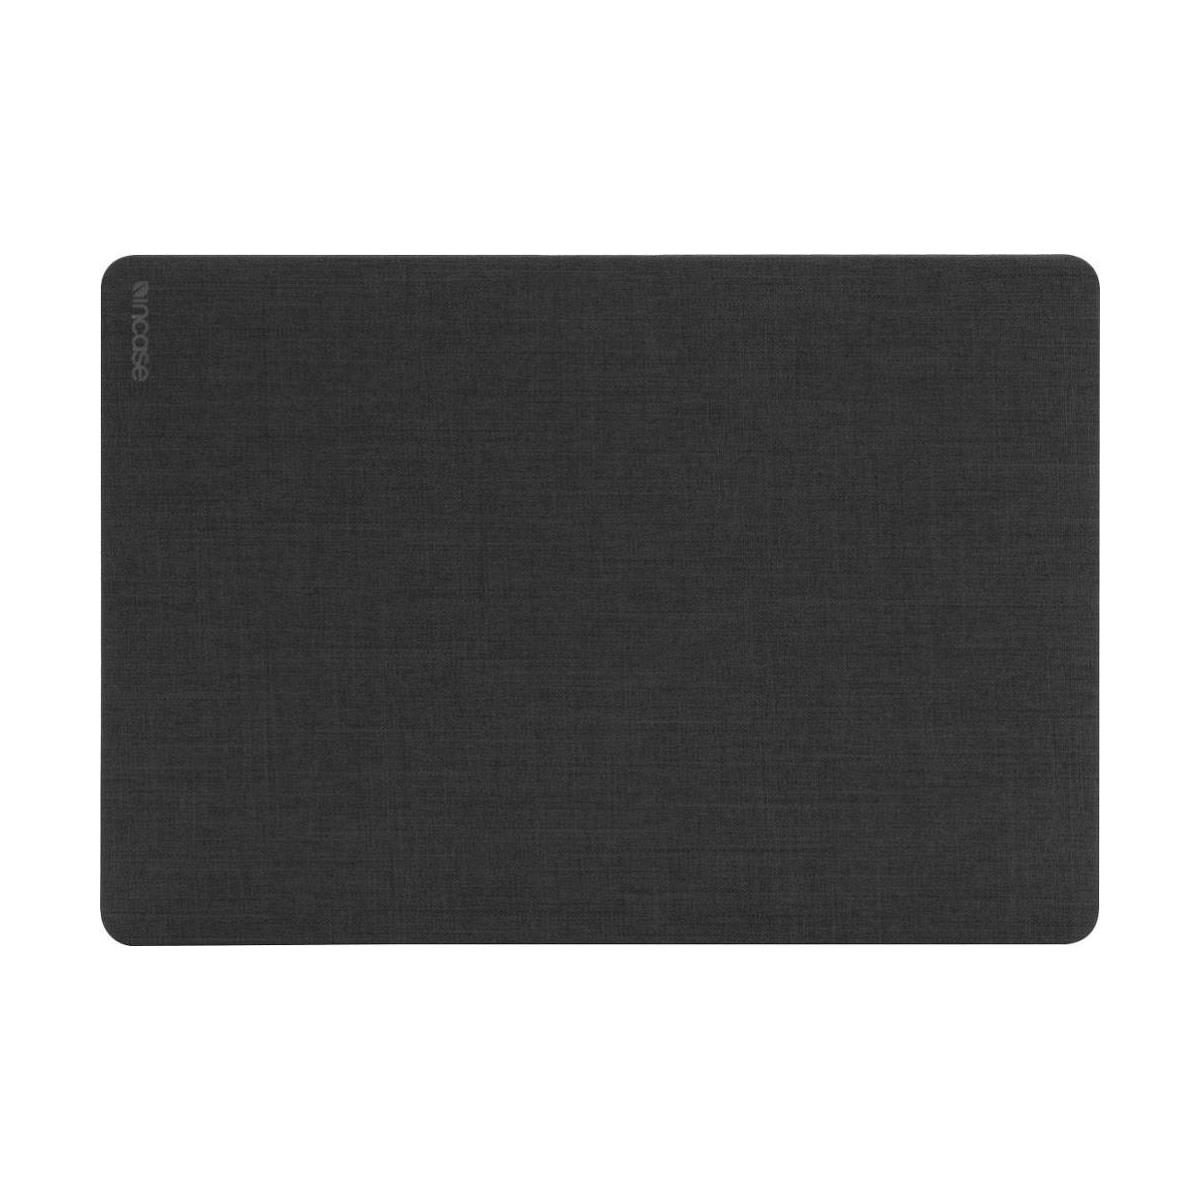 Incase Hardshell Case for 15.4" MacBook Pro with Touch Bar, Graphite -  6337909